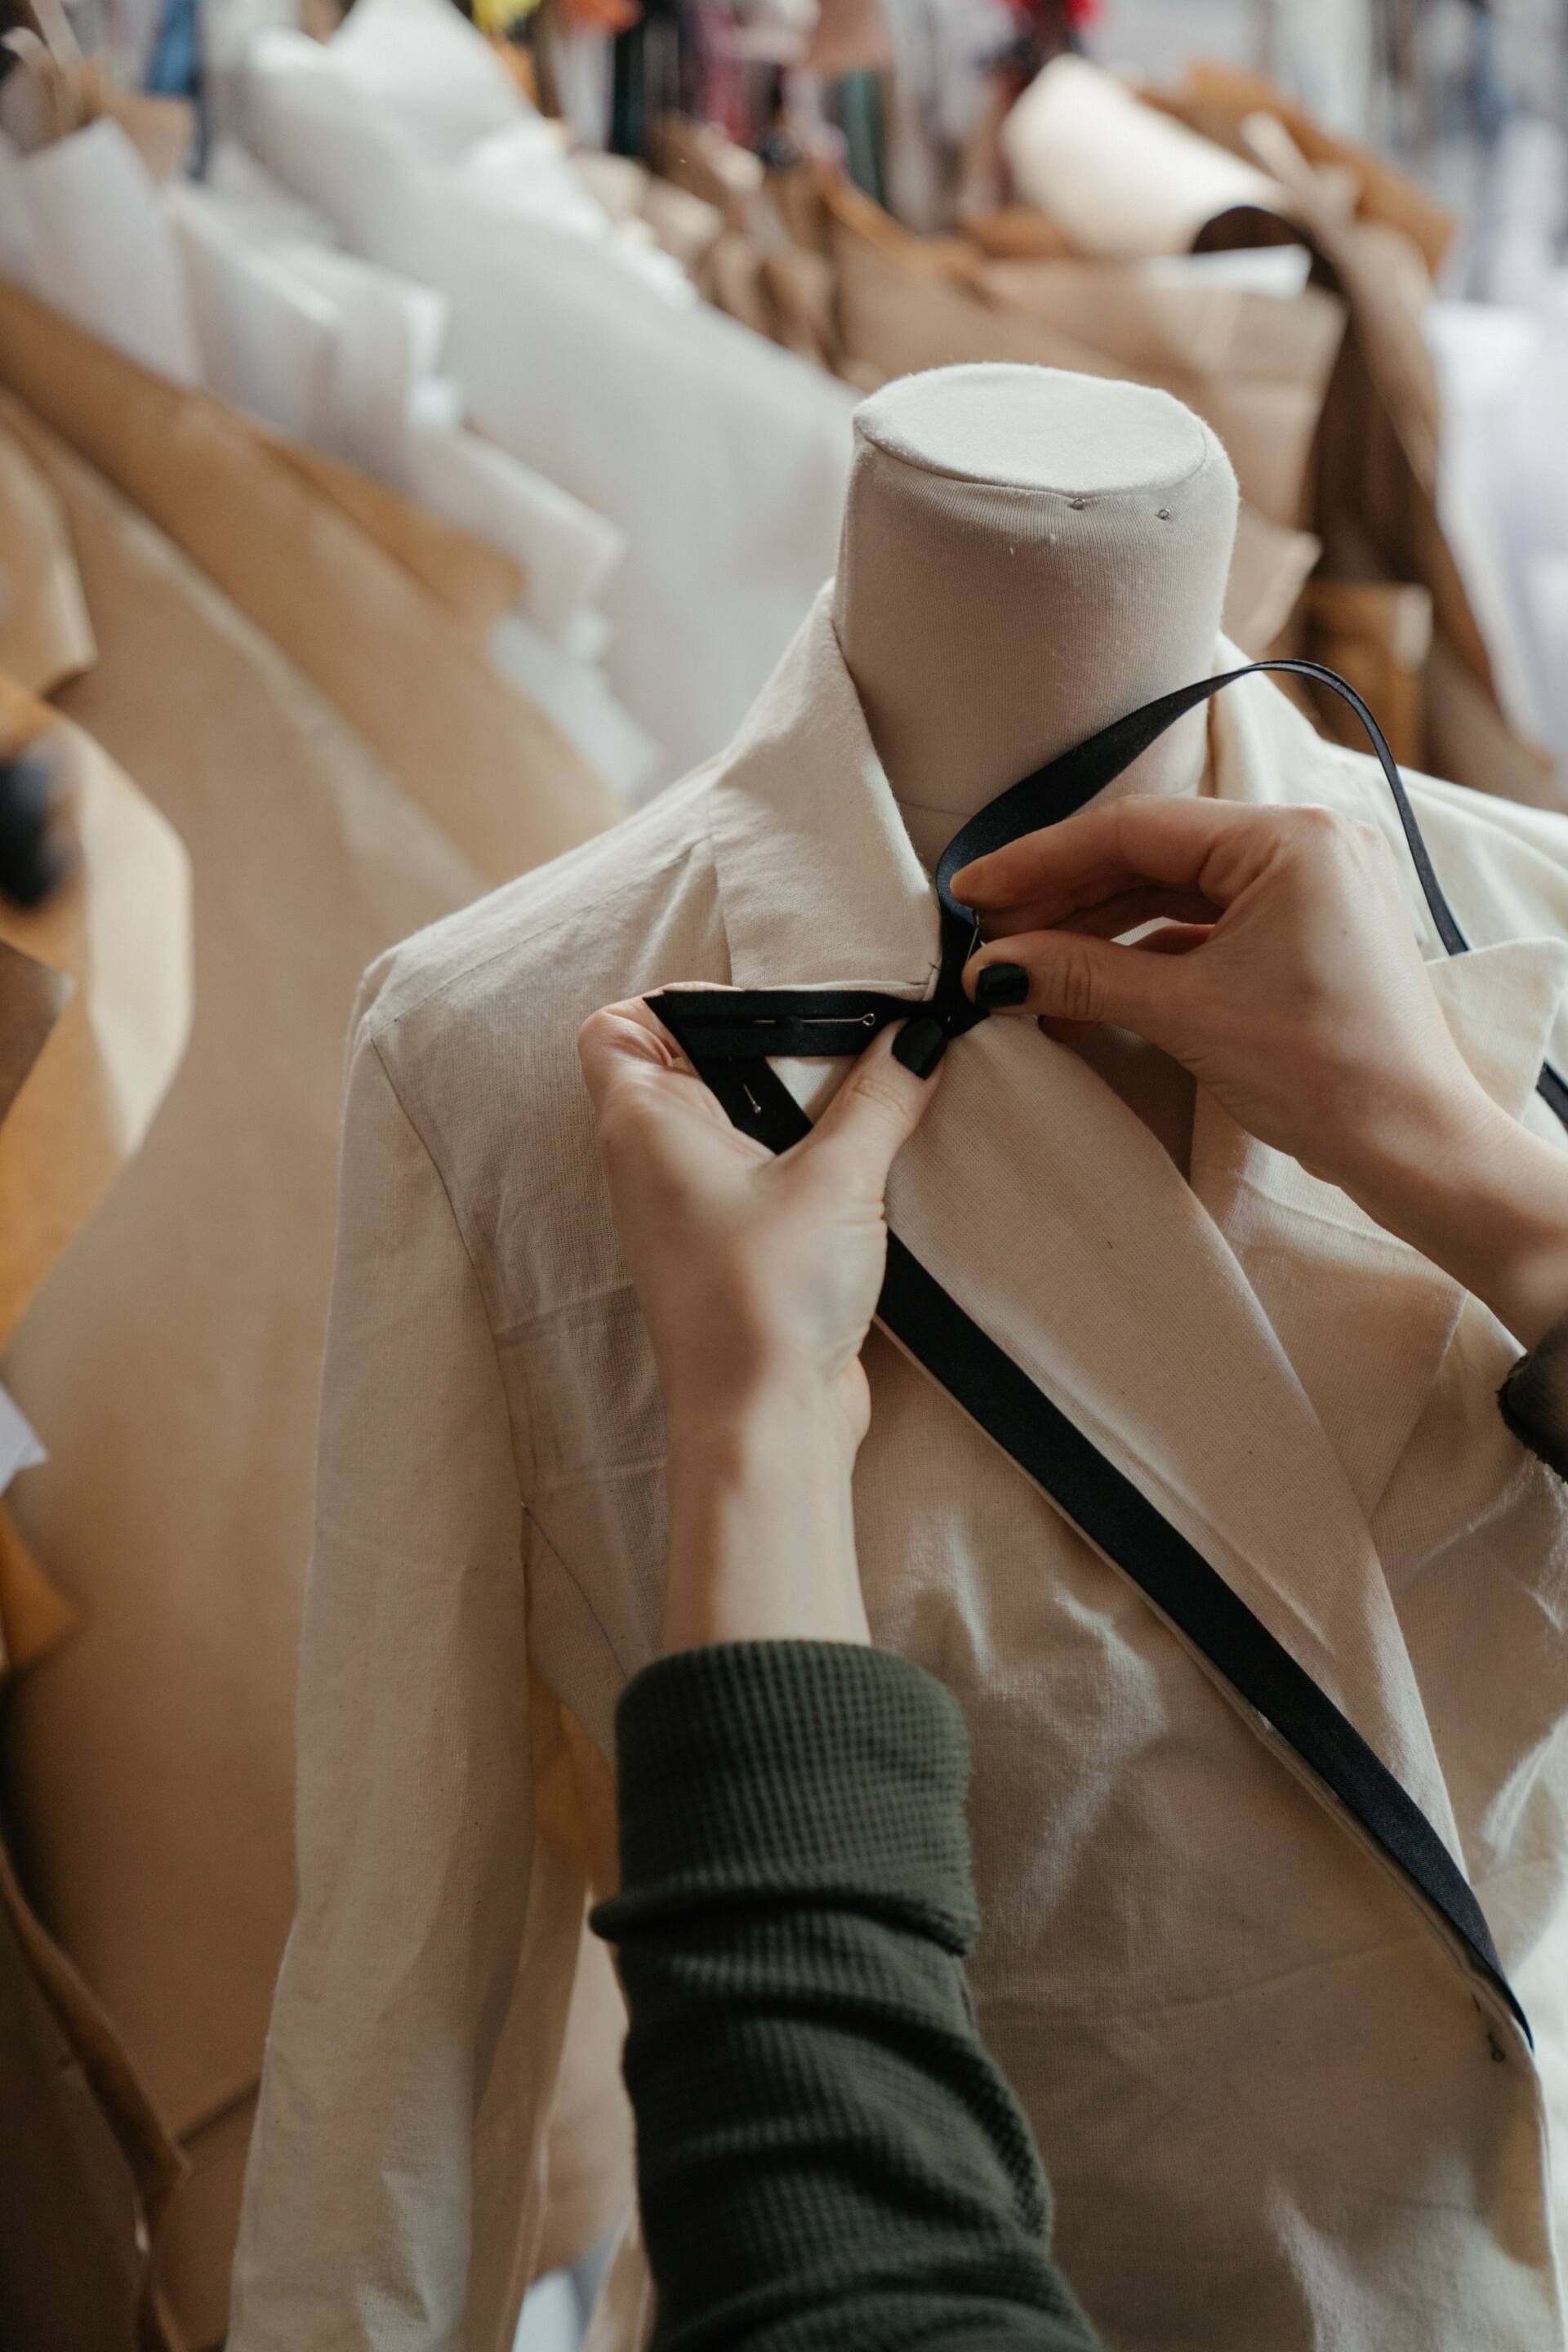 Why you should buy artisanal made clothing